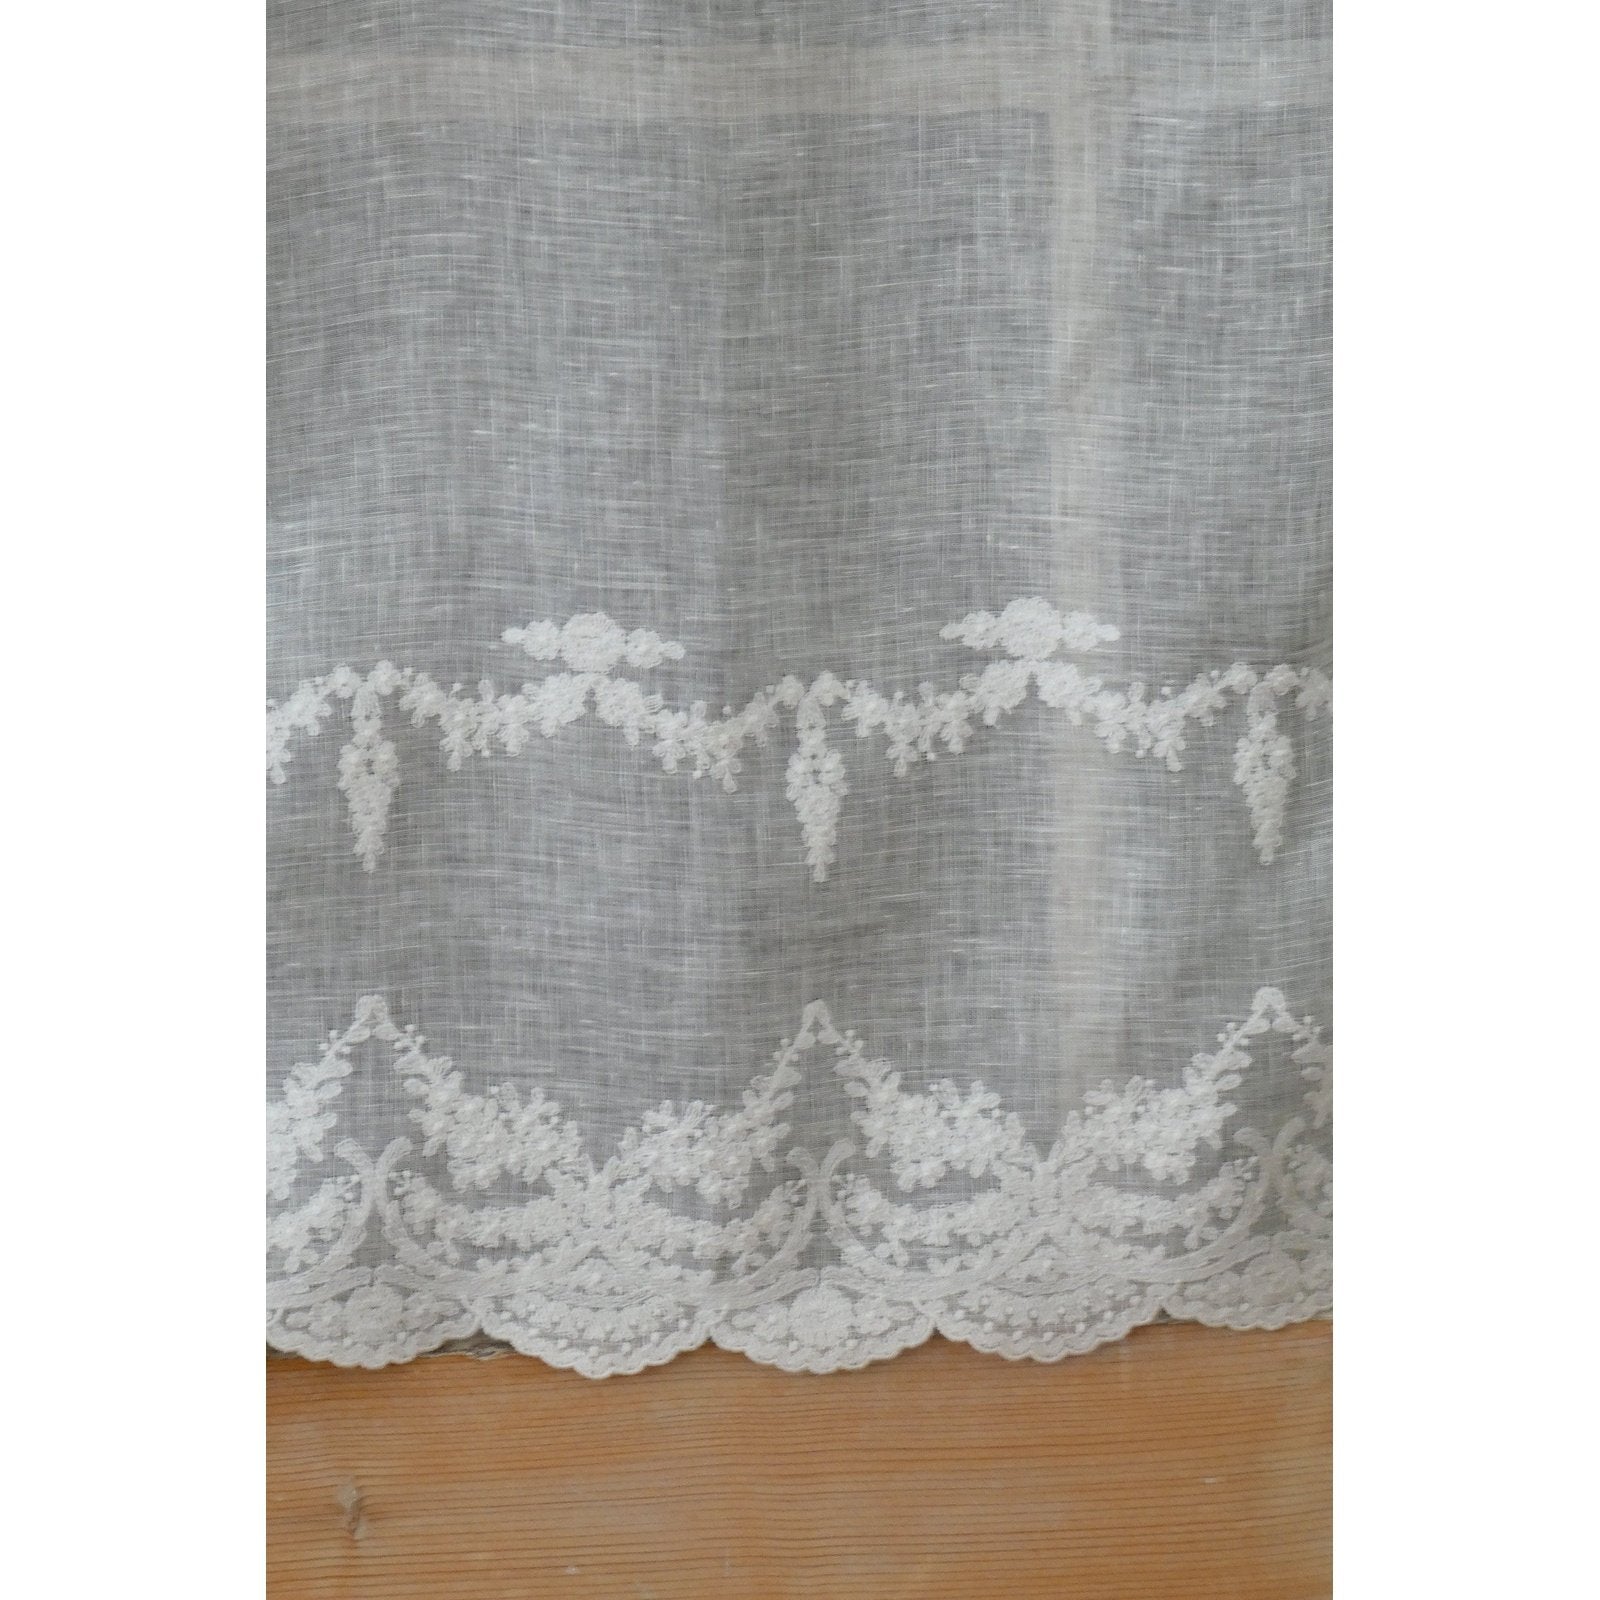 Embroidered linen short curtain adds a touch of rustic elegance to your kitchen window.